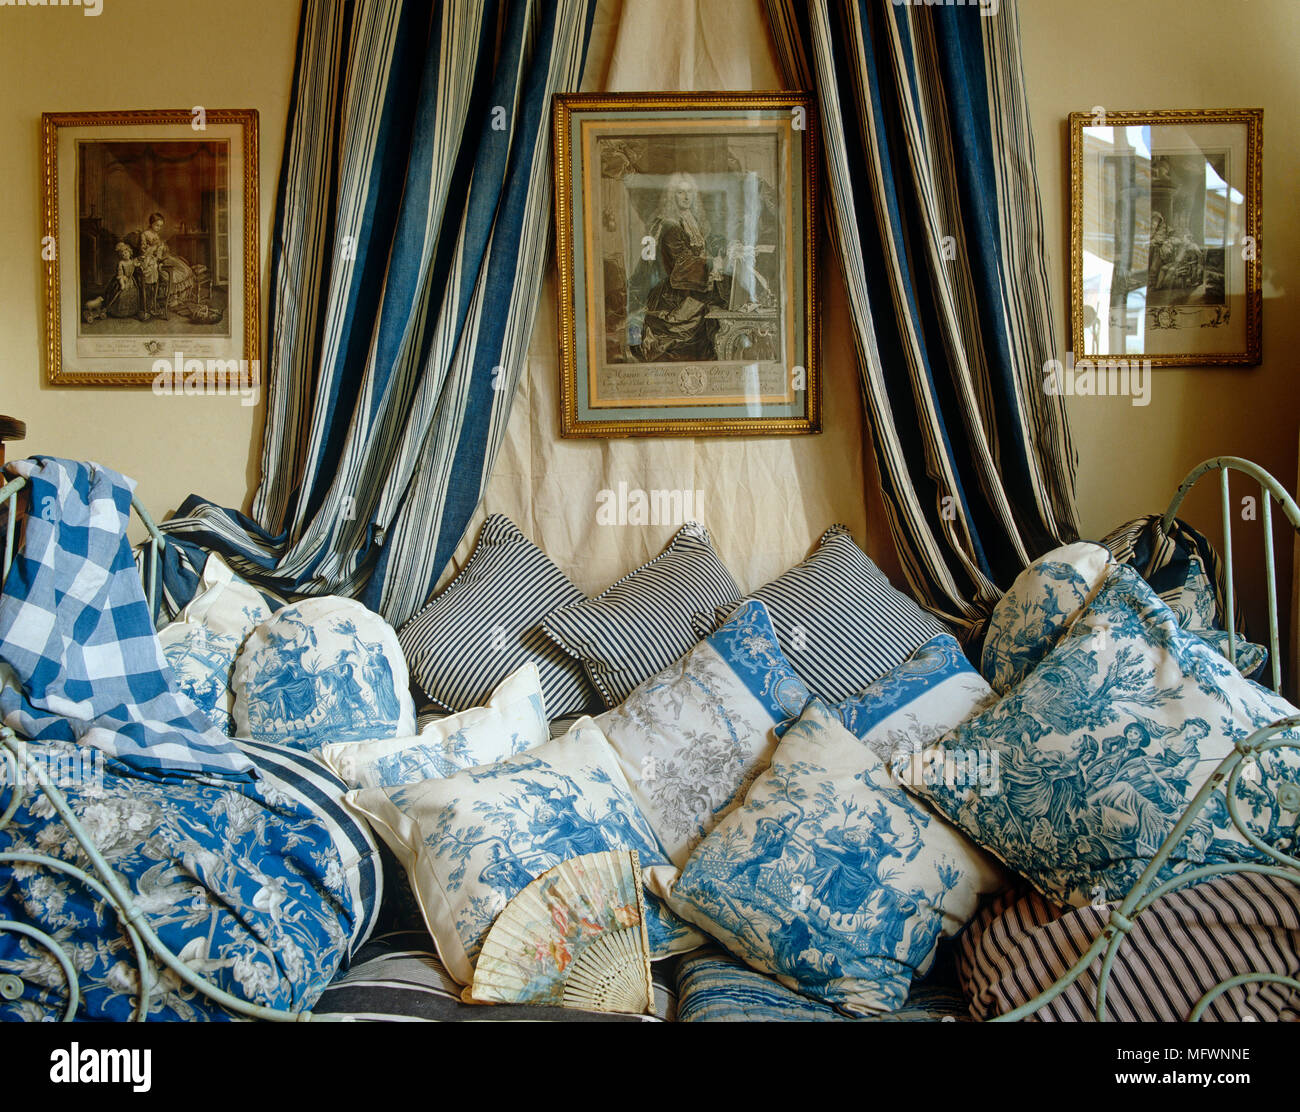 Collection toile de Jouy fabric cushions arranged on daybed Stock Photo